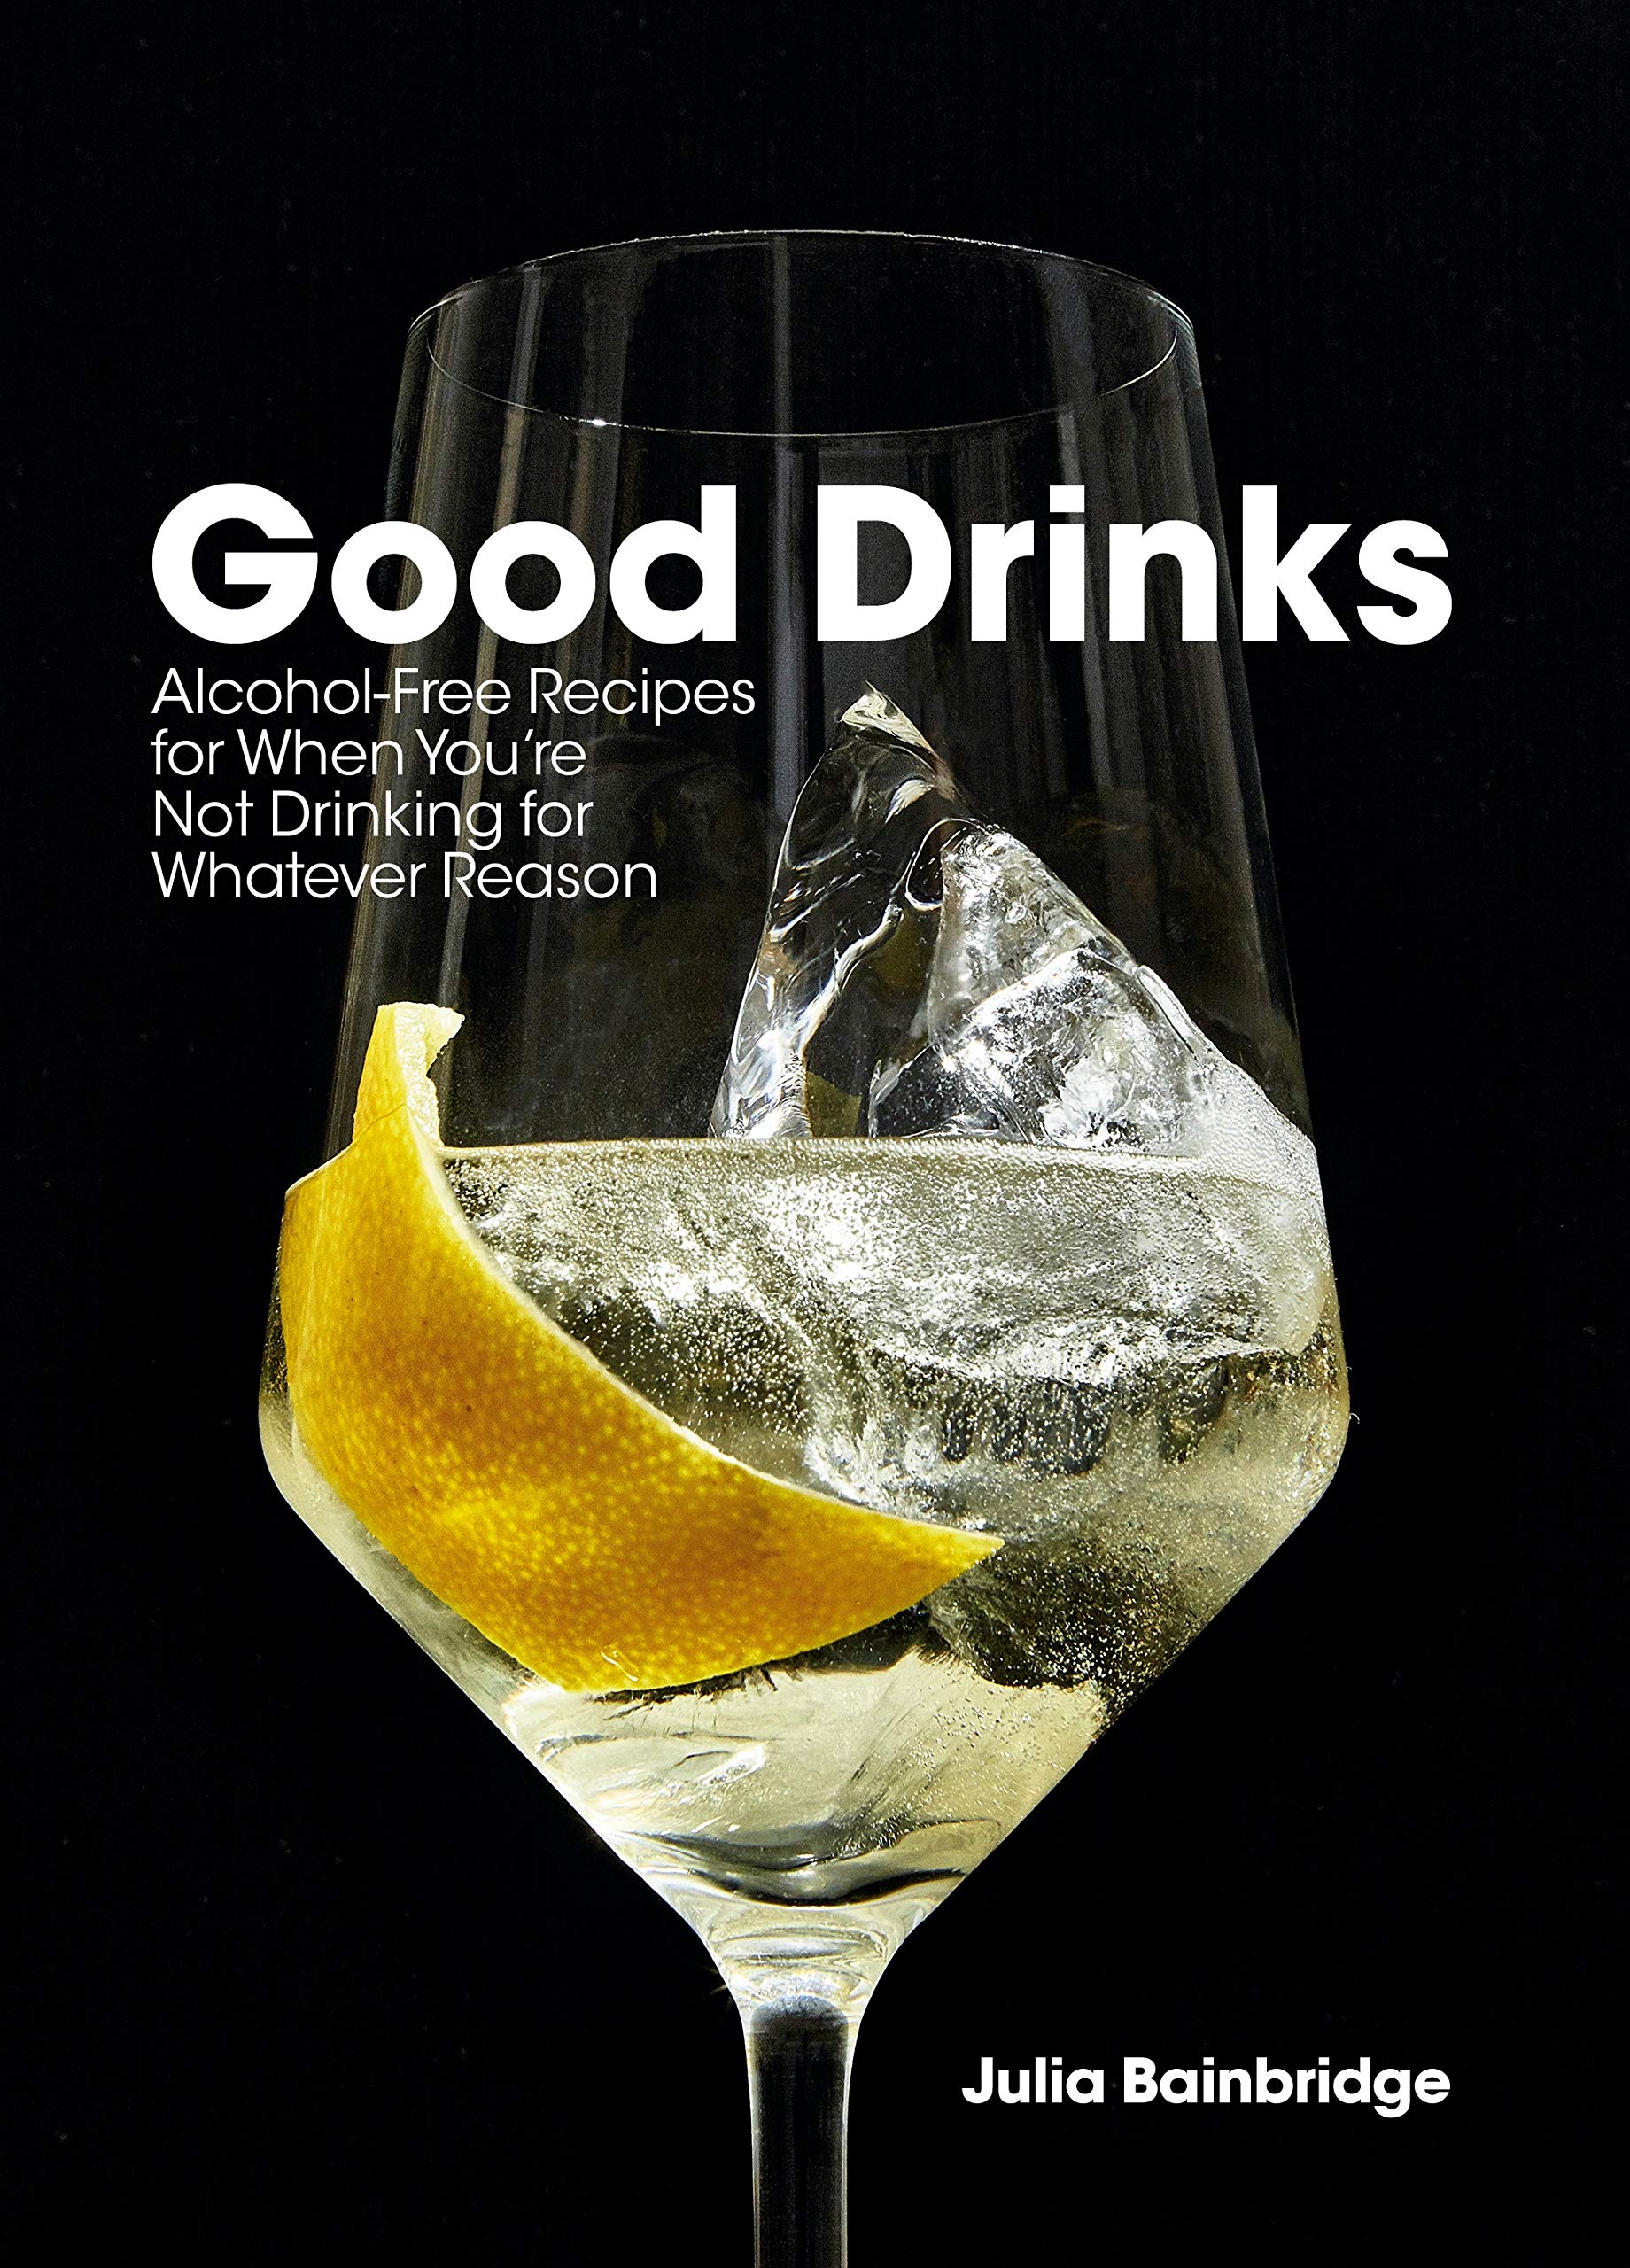 Good Drinks: Alcohol-Free Recipes for When You're Not Drinking for Whatever Reason (Julia Bainbridge)